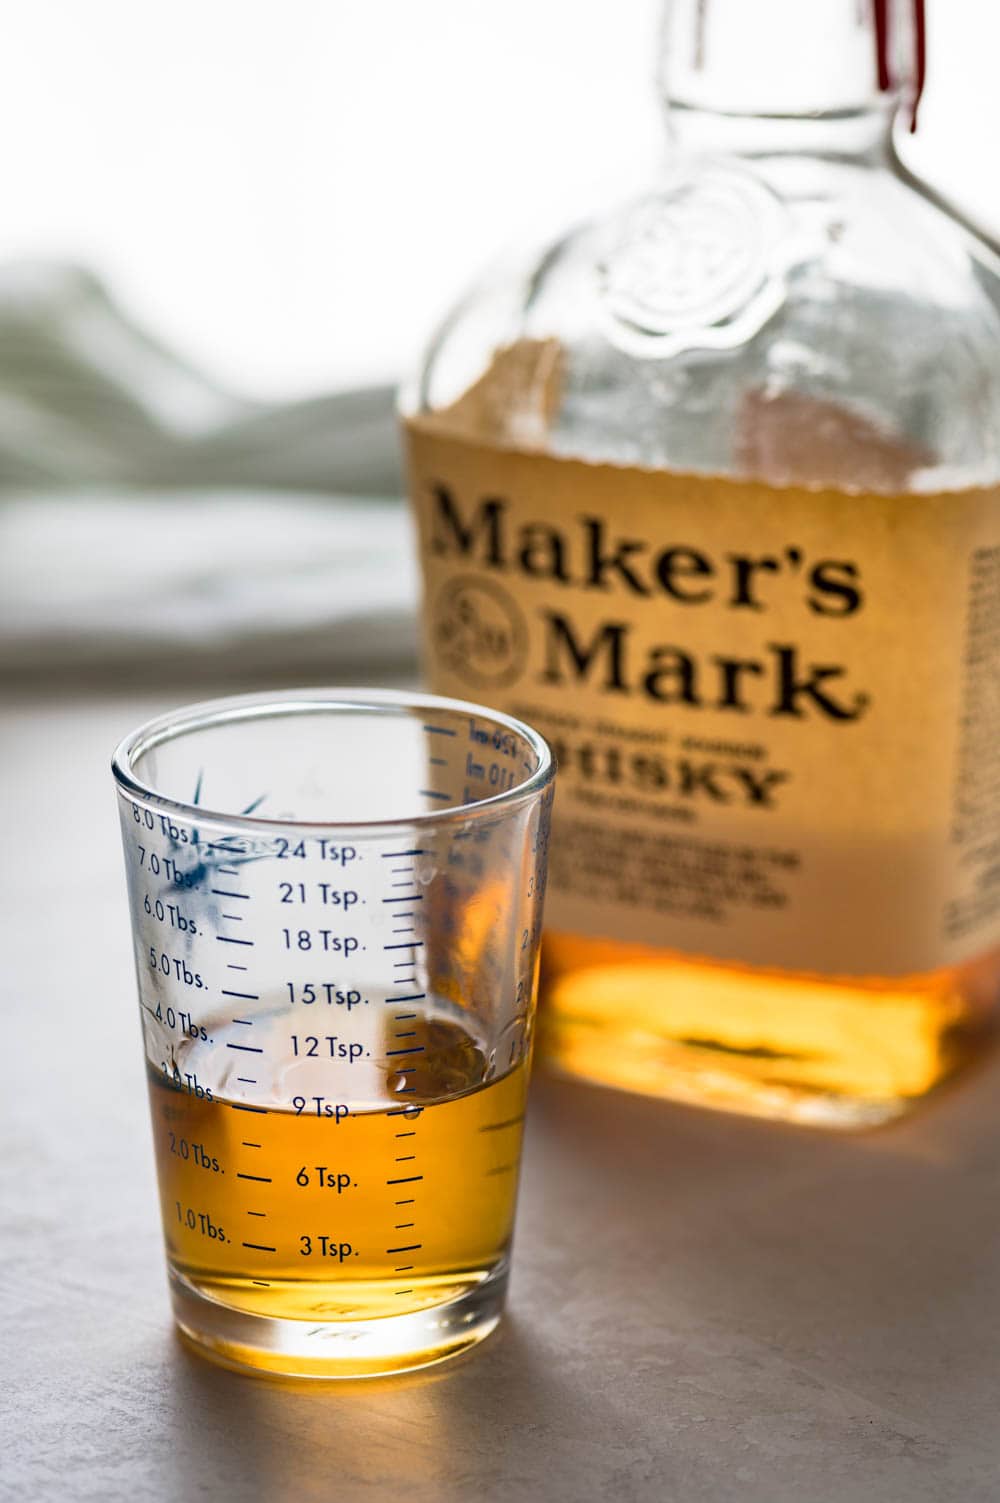 a bottle of Maker's Mark bourbon measured out to 3 tablespoons.